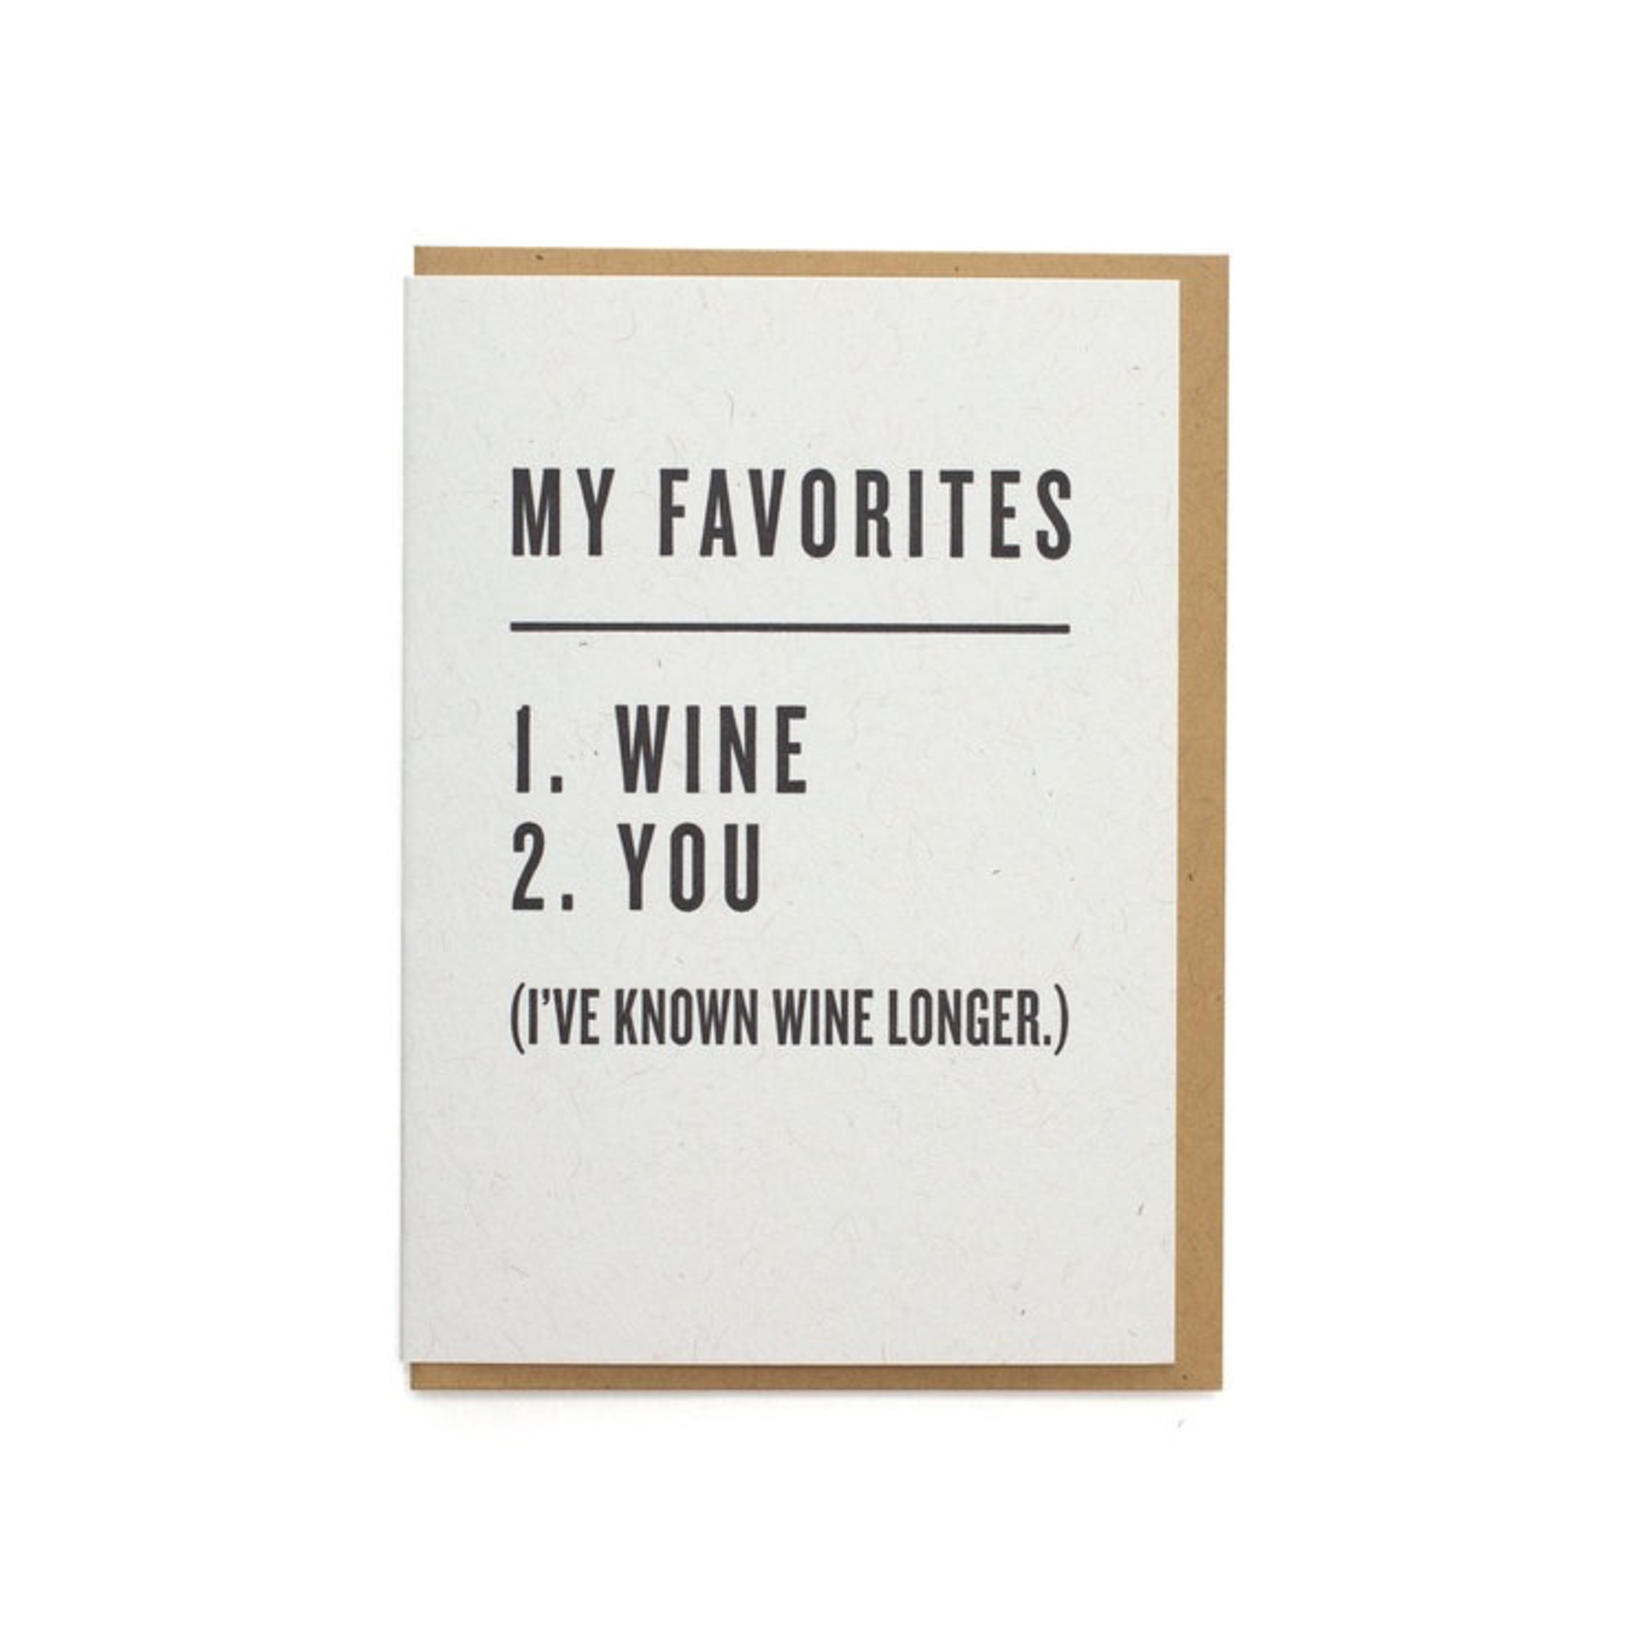 Greeting Cards - Love Favorites: Wine & You